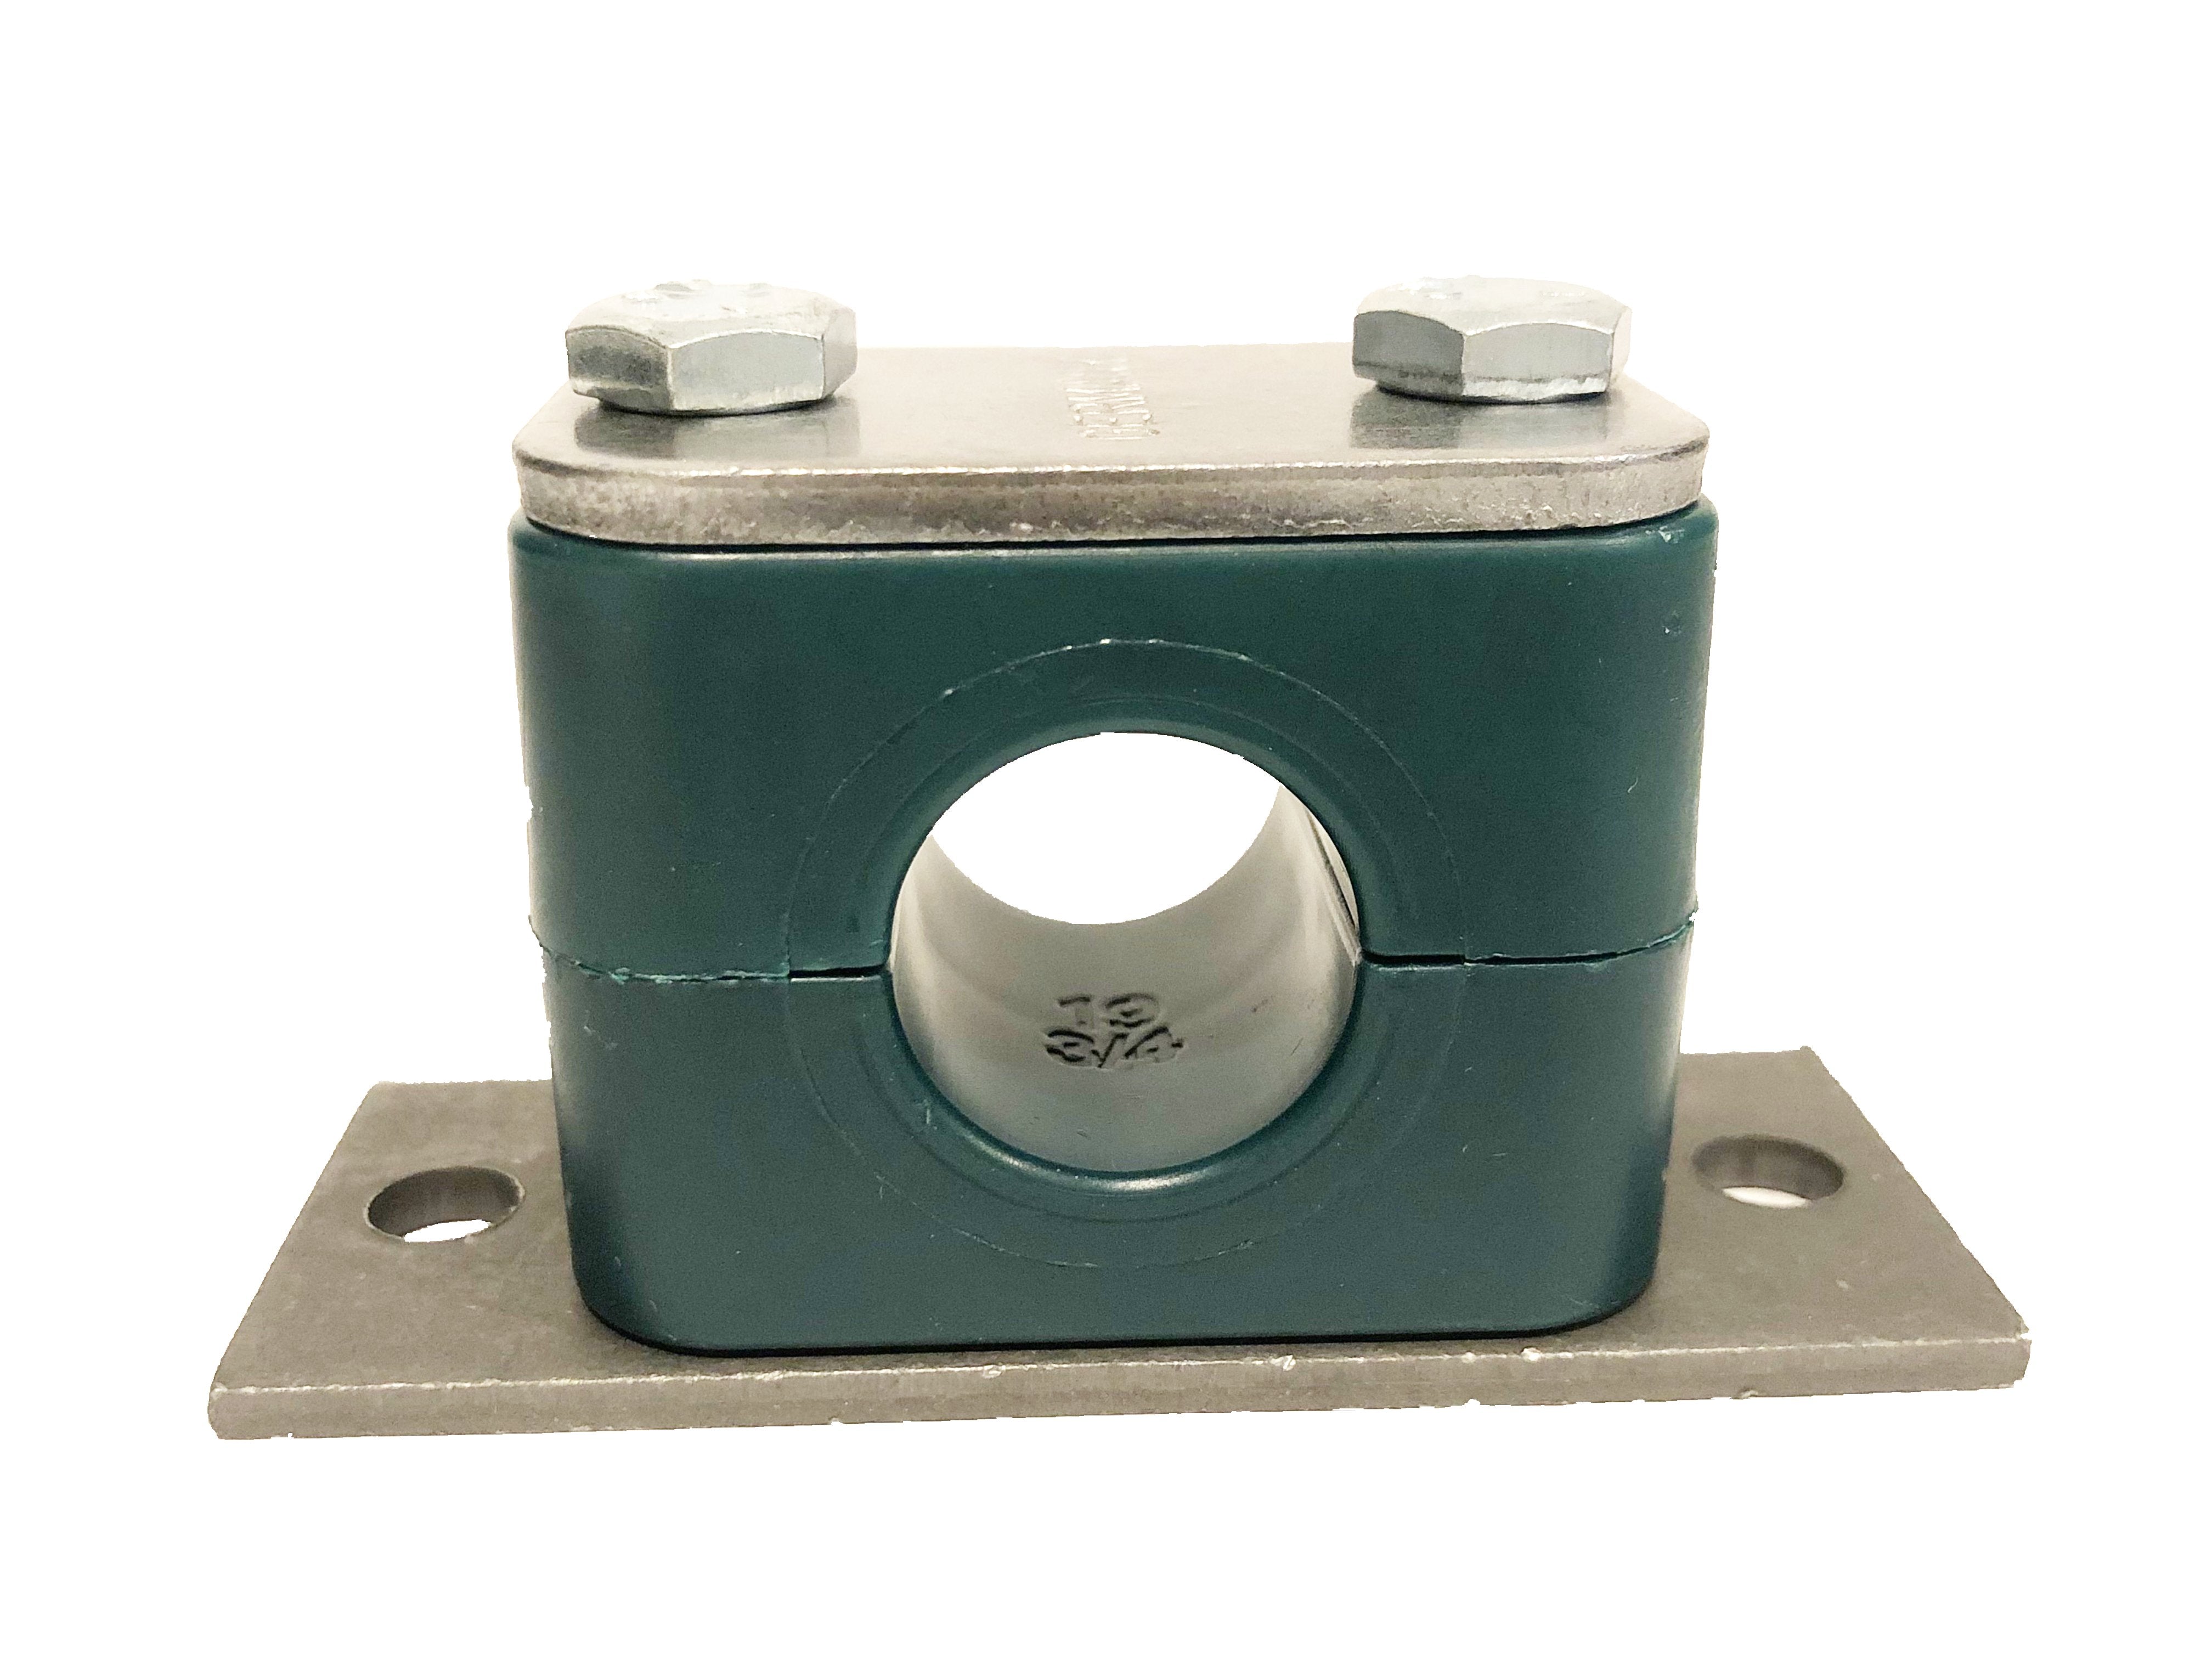 SPV-321.3-PP-H-DP-AS-U-W10 : Stauff Clamp, Elongated Weld Plate, 0.84" (21.3mm) OD, for 1/2" Pipe, Green PP Insert, Smooth Interior, Carbon Steel